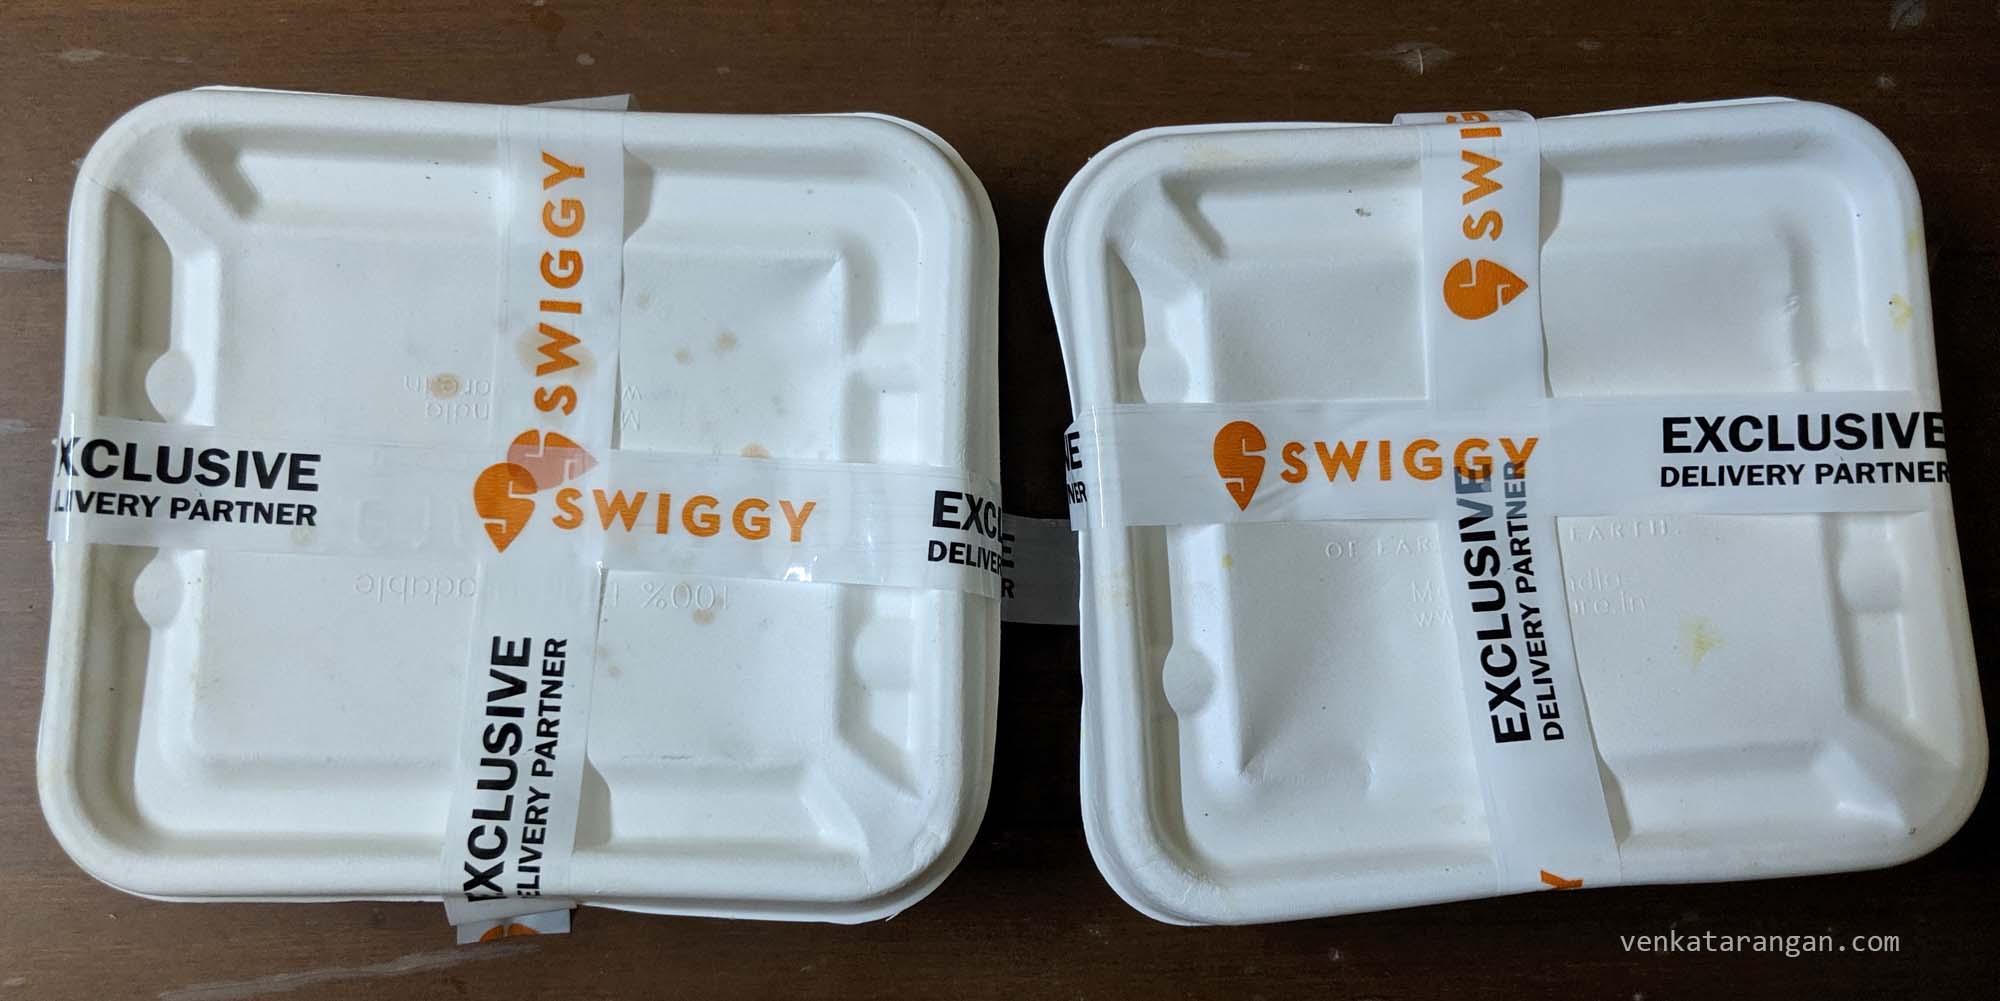 Dinner box sealed with Swiggy tape for assurance